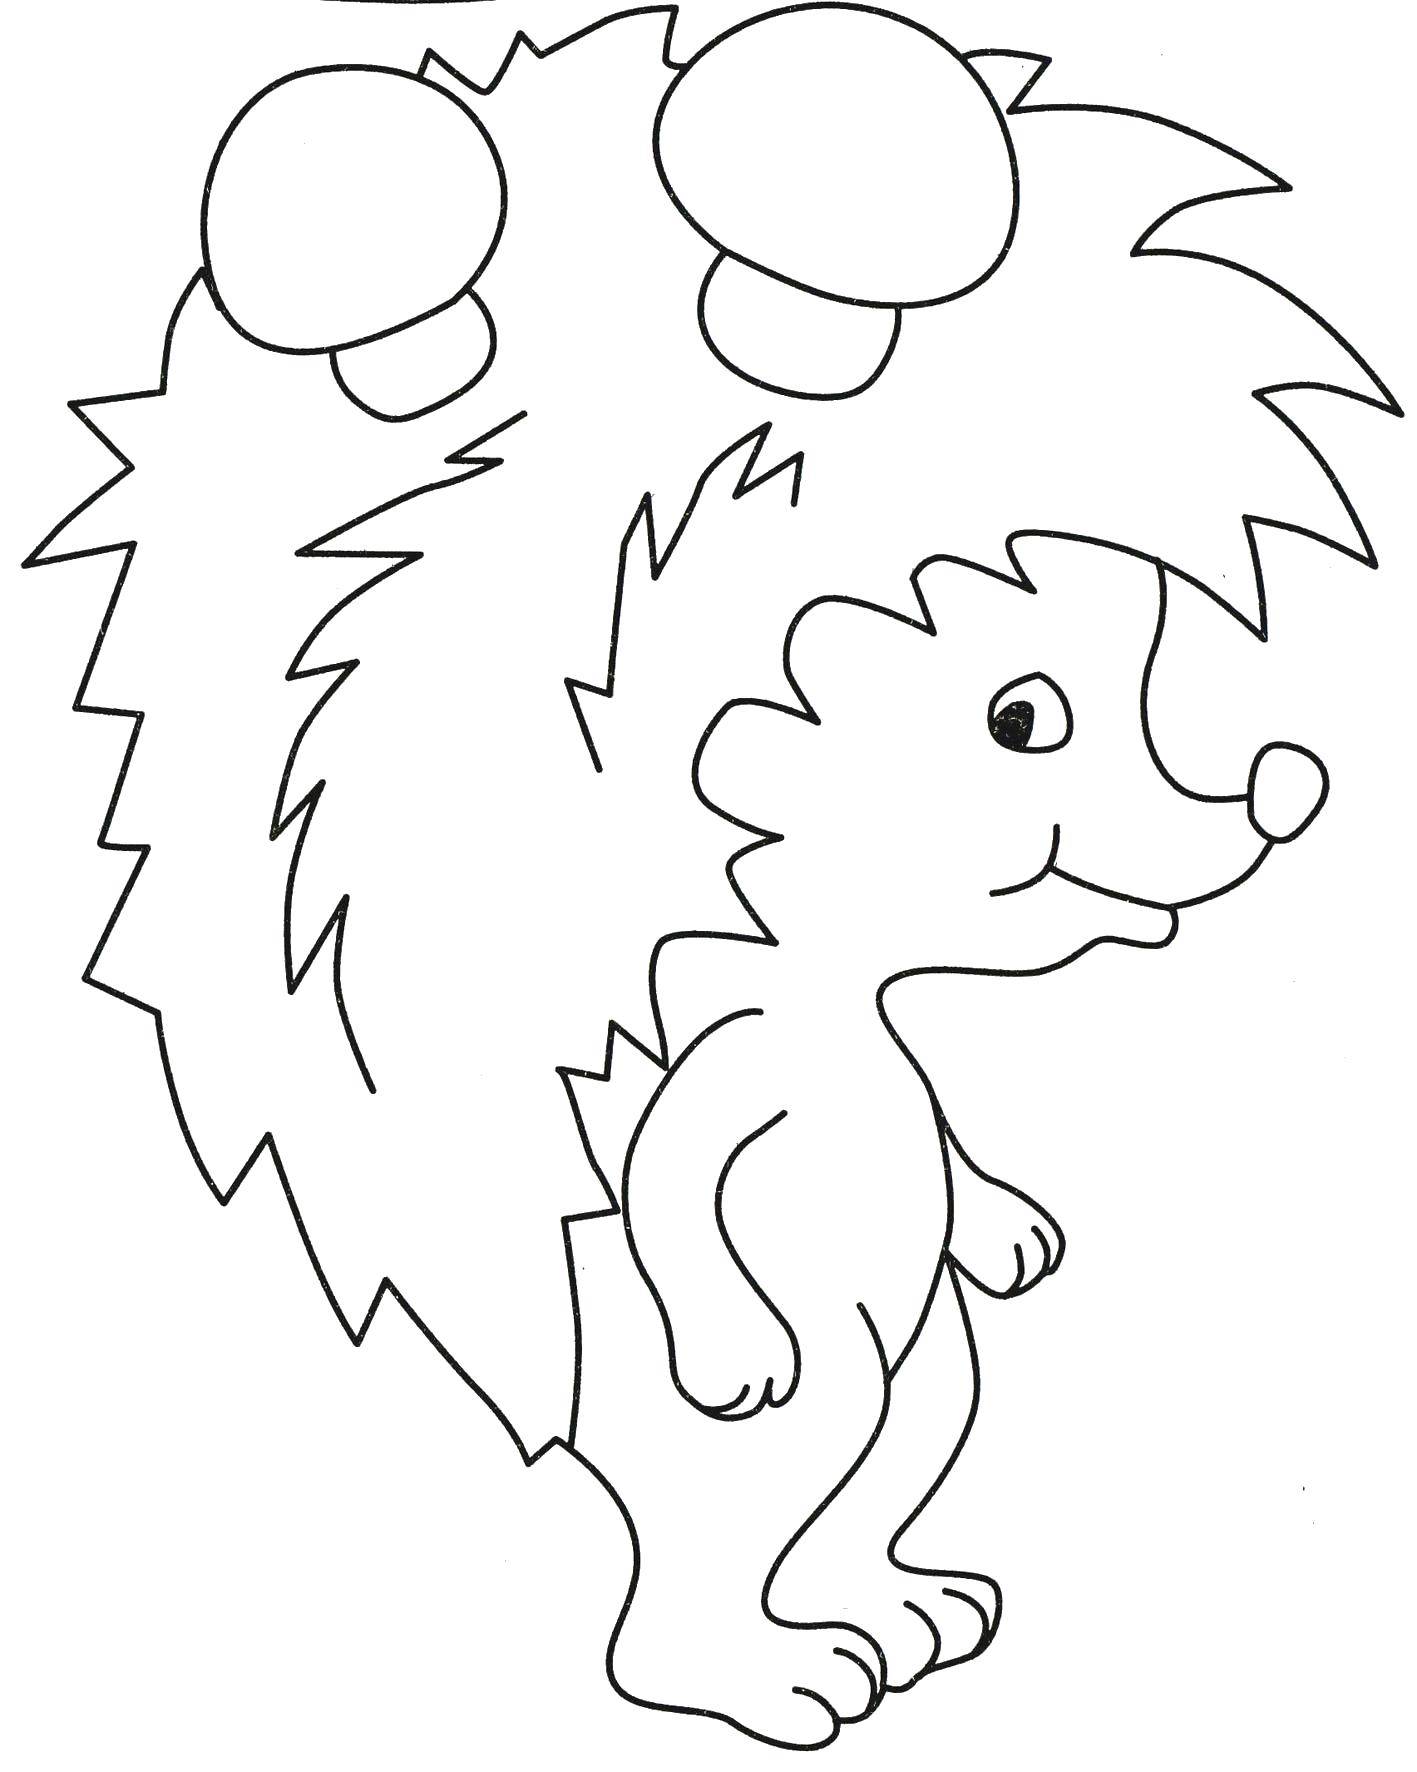 Coloring Hedgehog with mushrooms. Category Animals. Tags:  animals, hedgehog, mushroom.